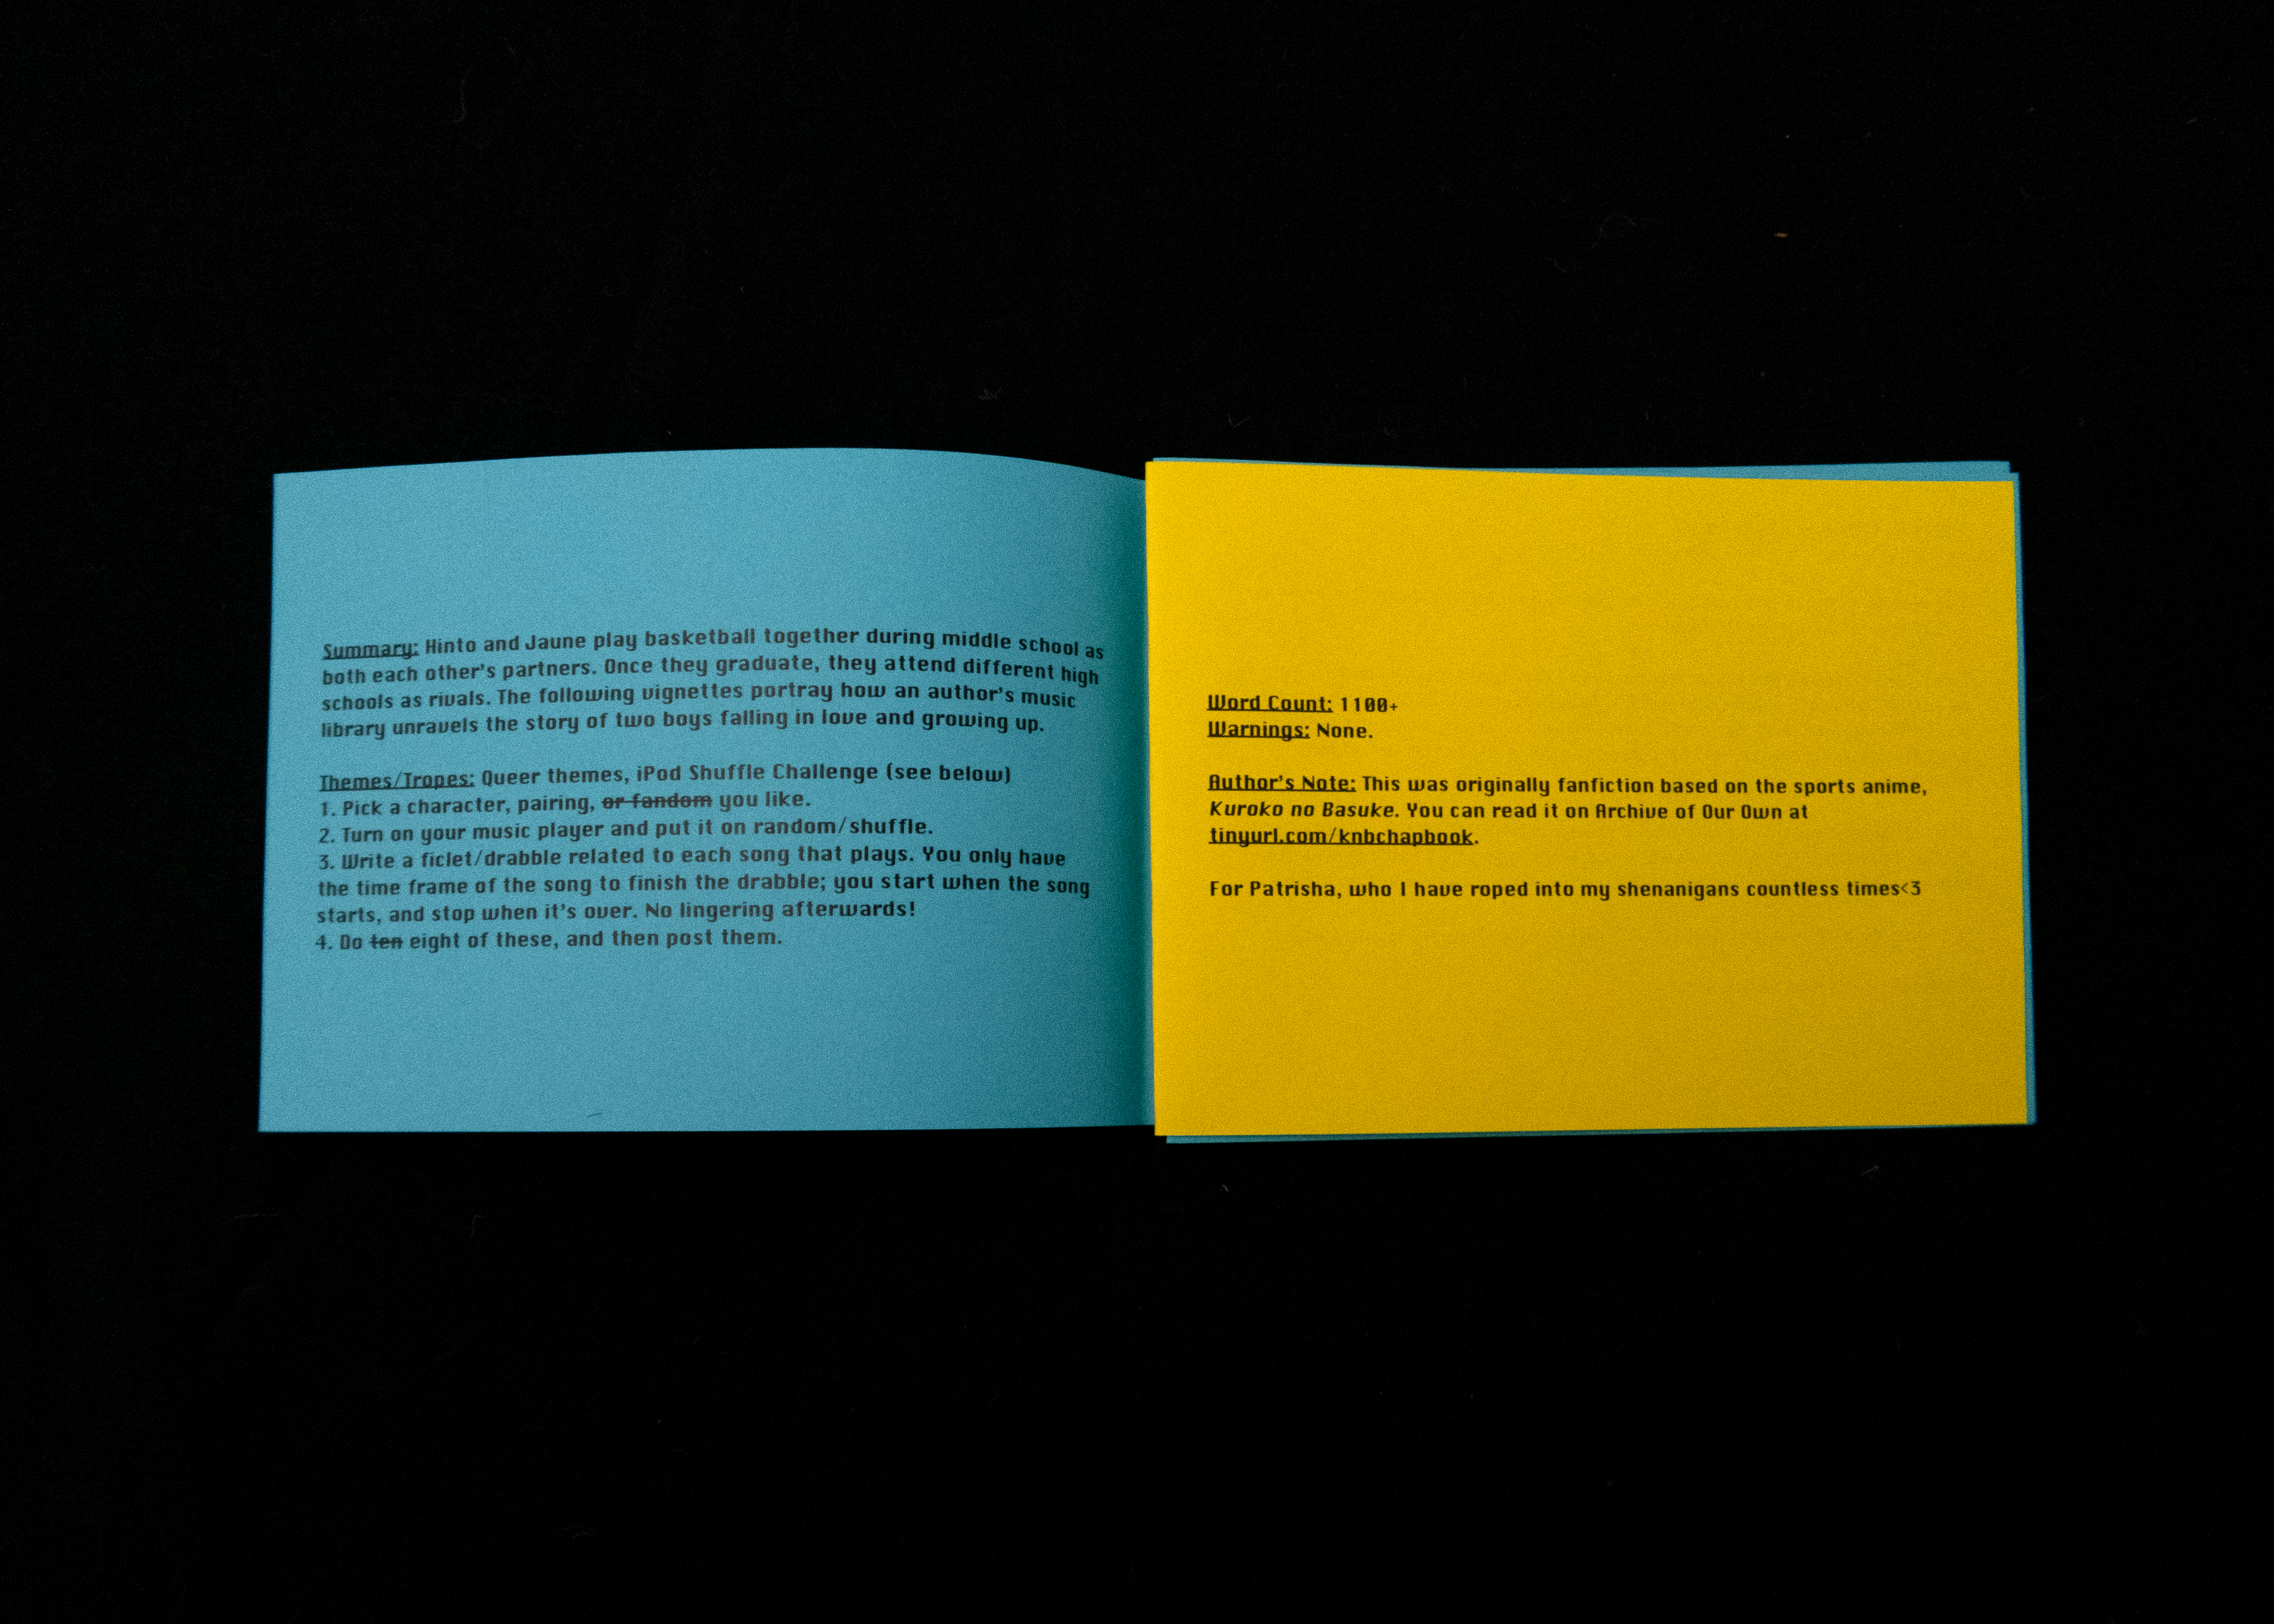 The opening spread of Blue & Yellow displaying the story's information--the summary and themes on the left; word count, warnings, and author's note on the right.